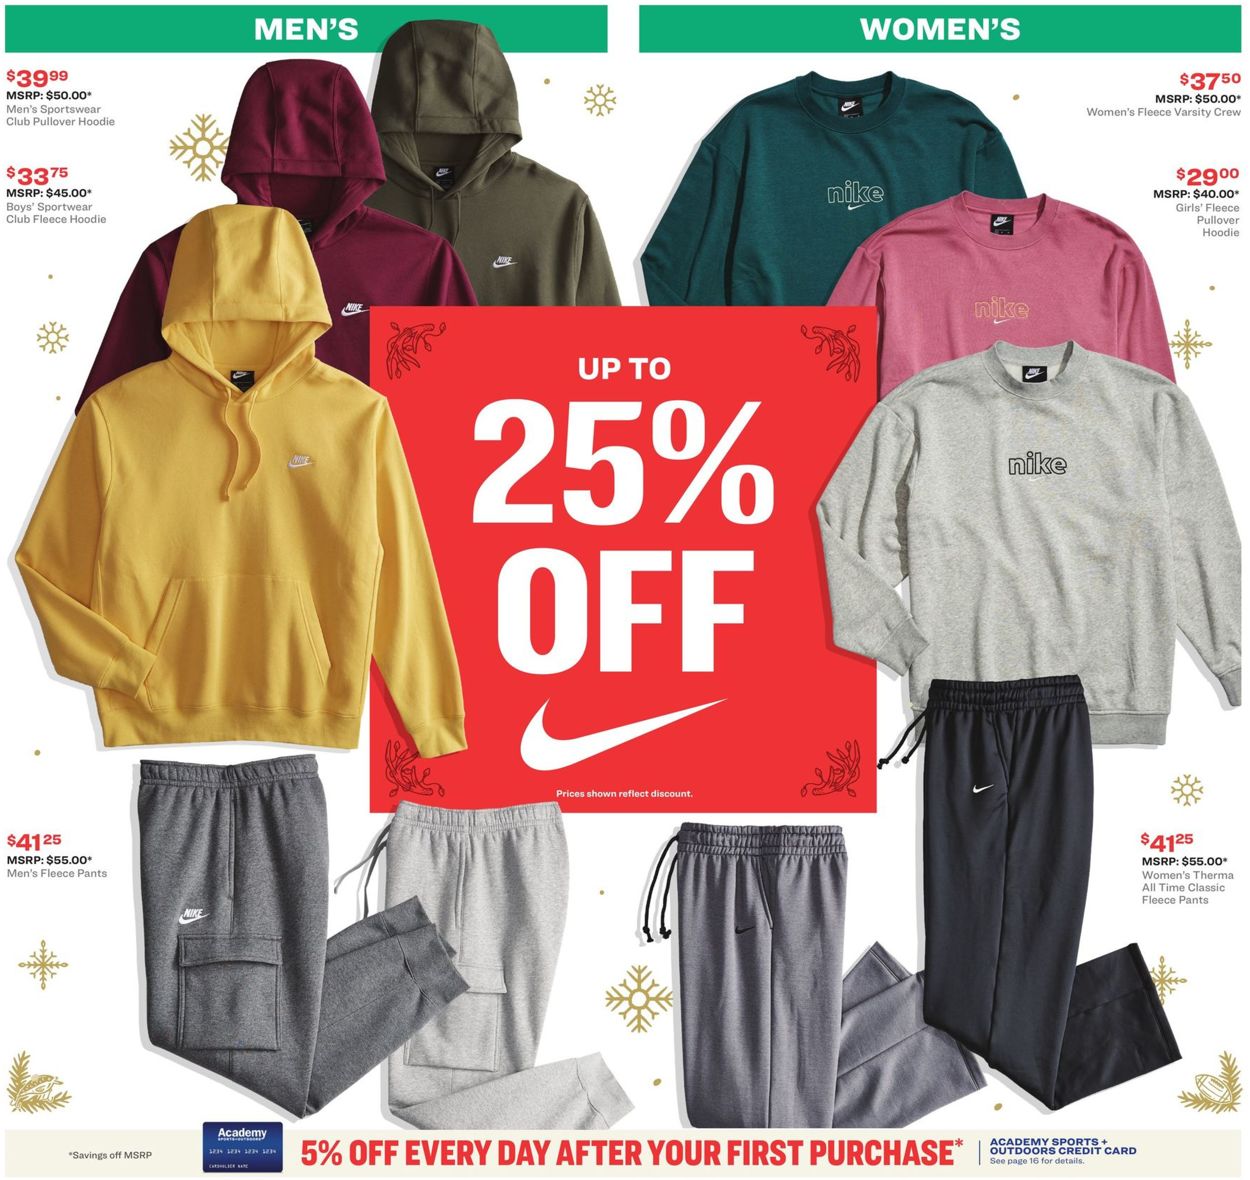 Catalogue Academy Sports Apparel & Footwear 2020 from 12/14/2020